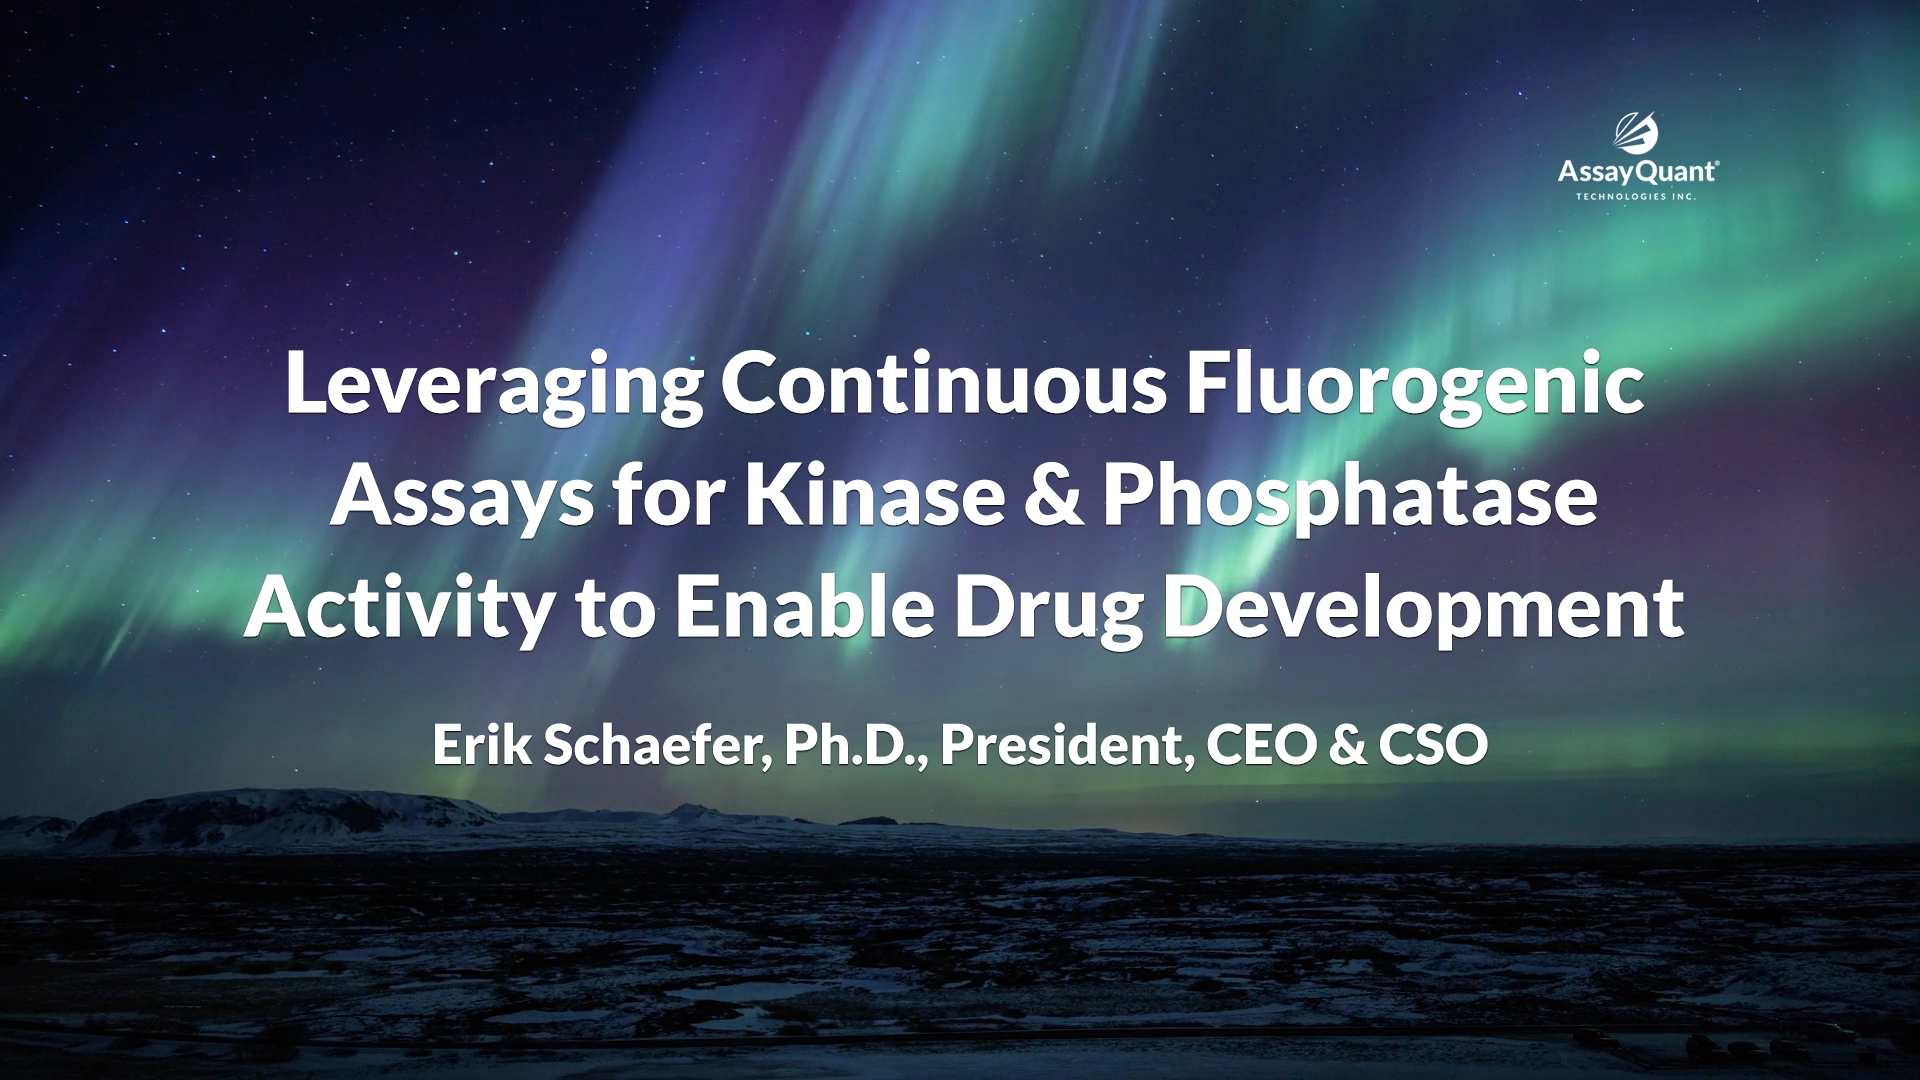 Leveraging-Continuous-Fluorogenic-Assays-for-Kinase-&-Phosphatase-Activity-1